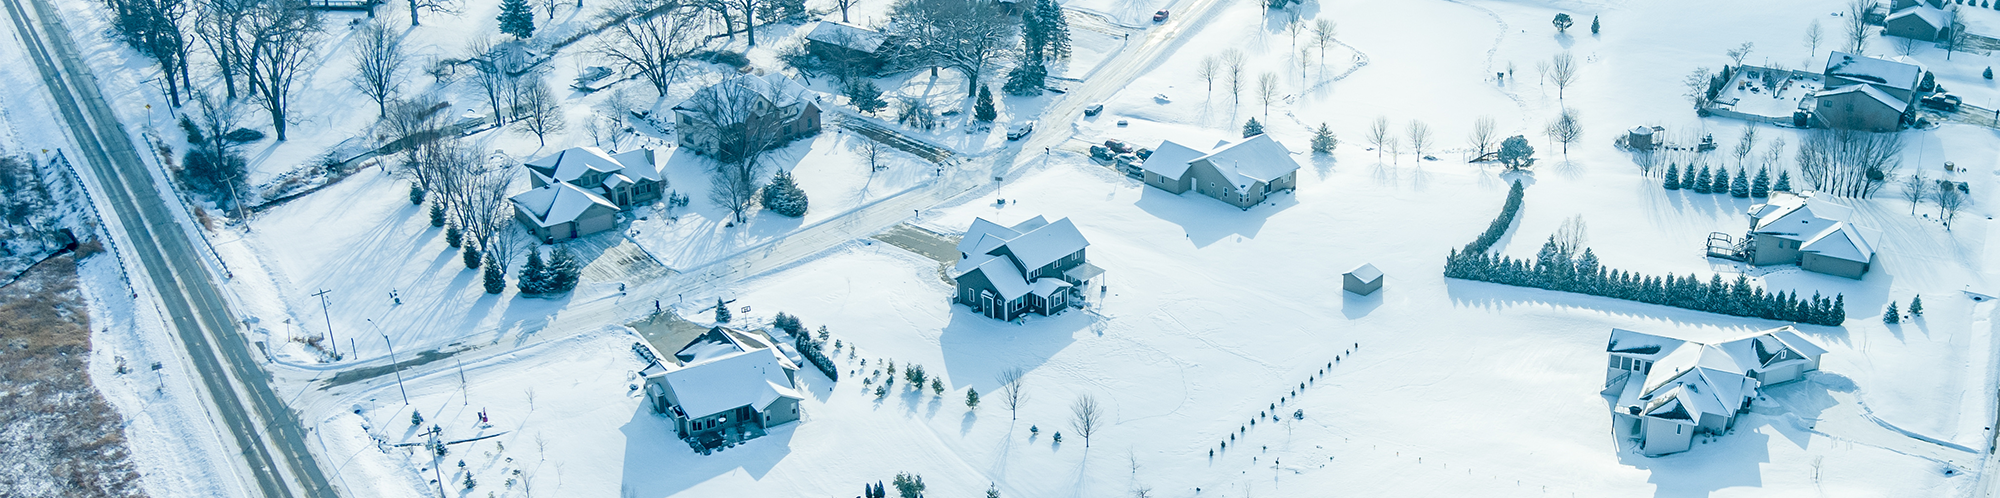 neighborhood ariel view where every home is covered with snow